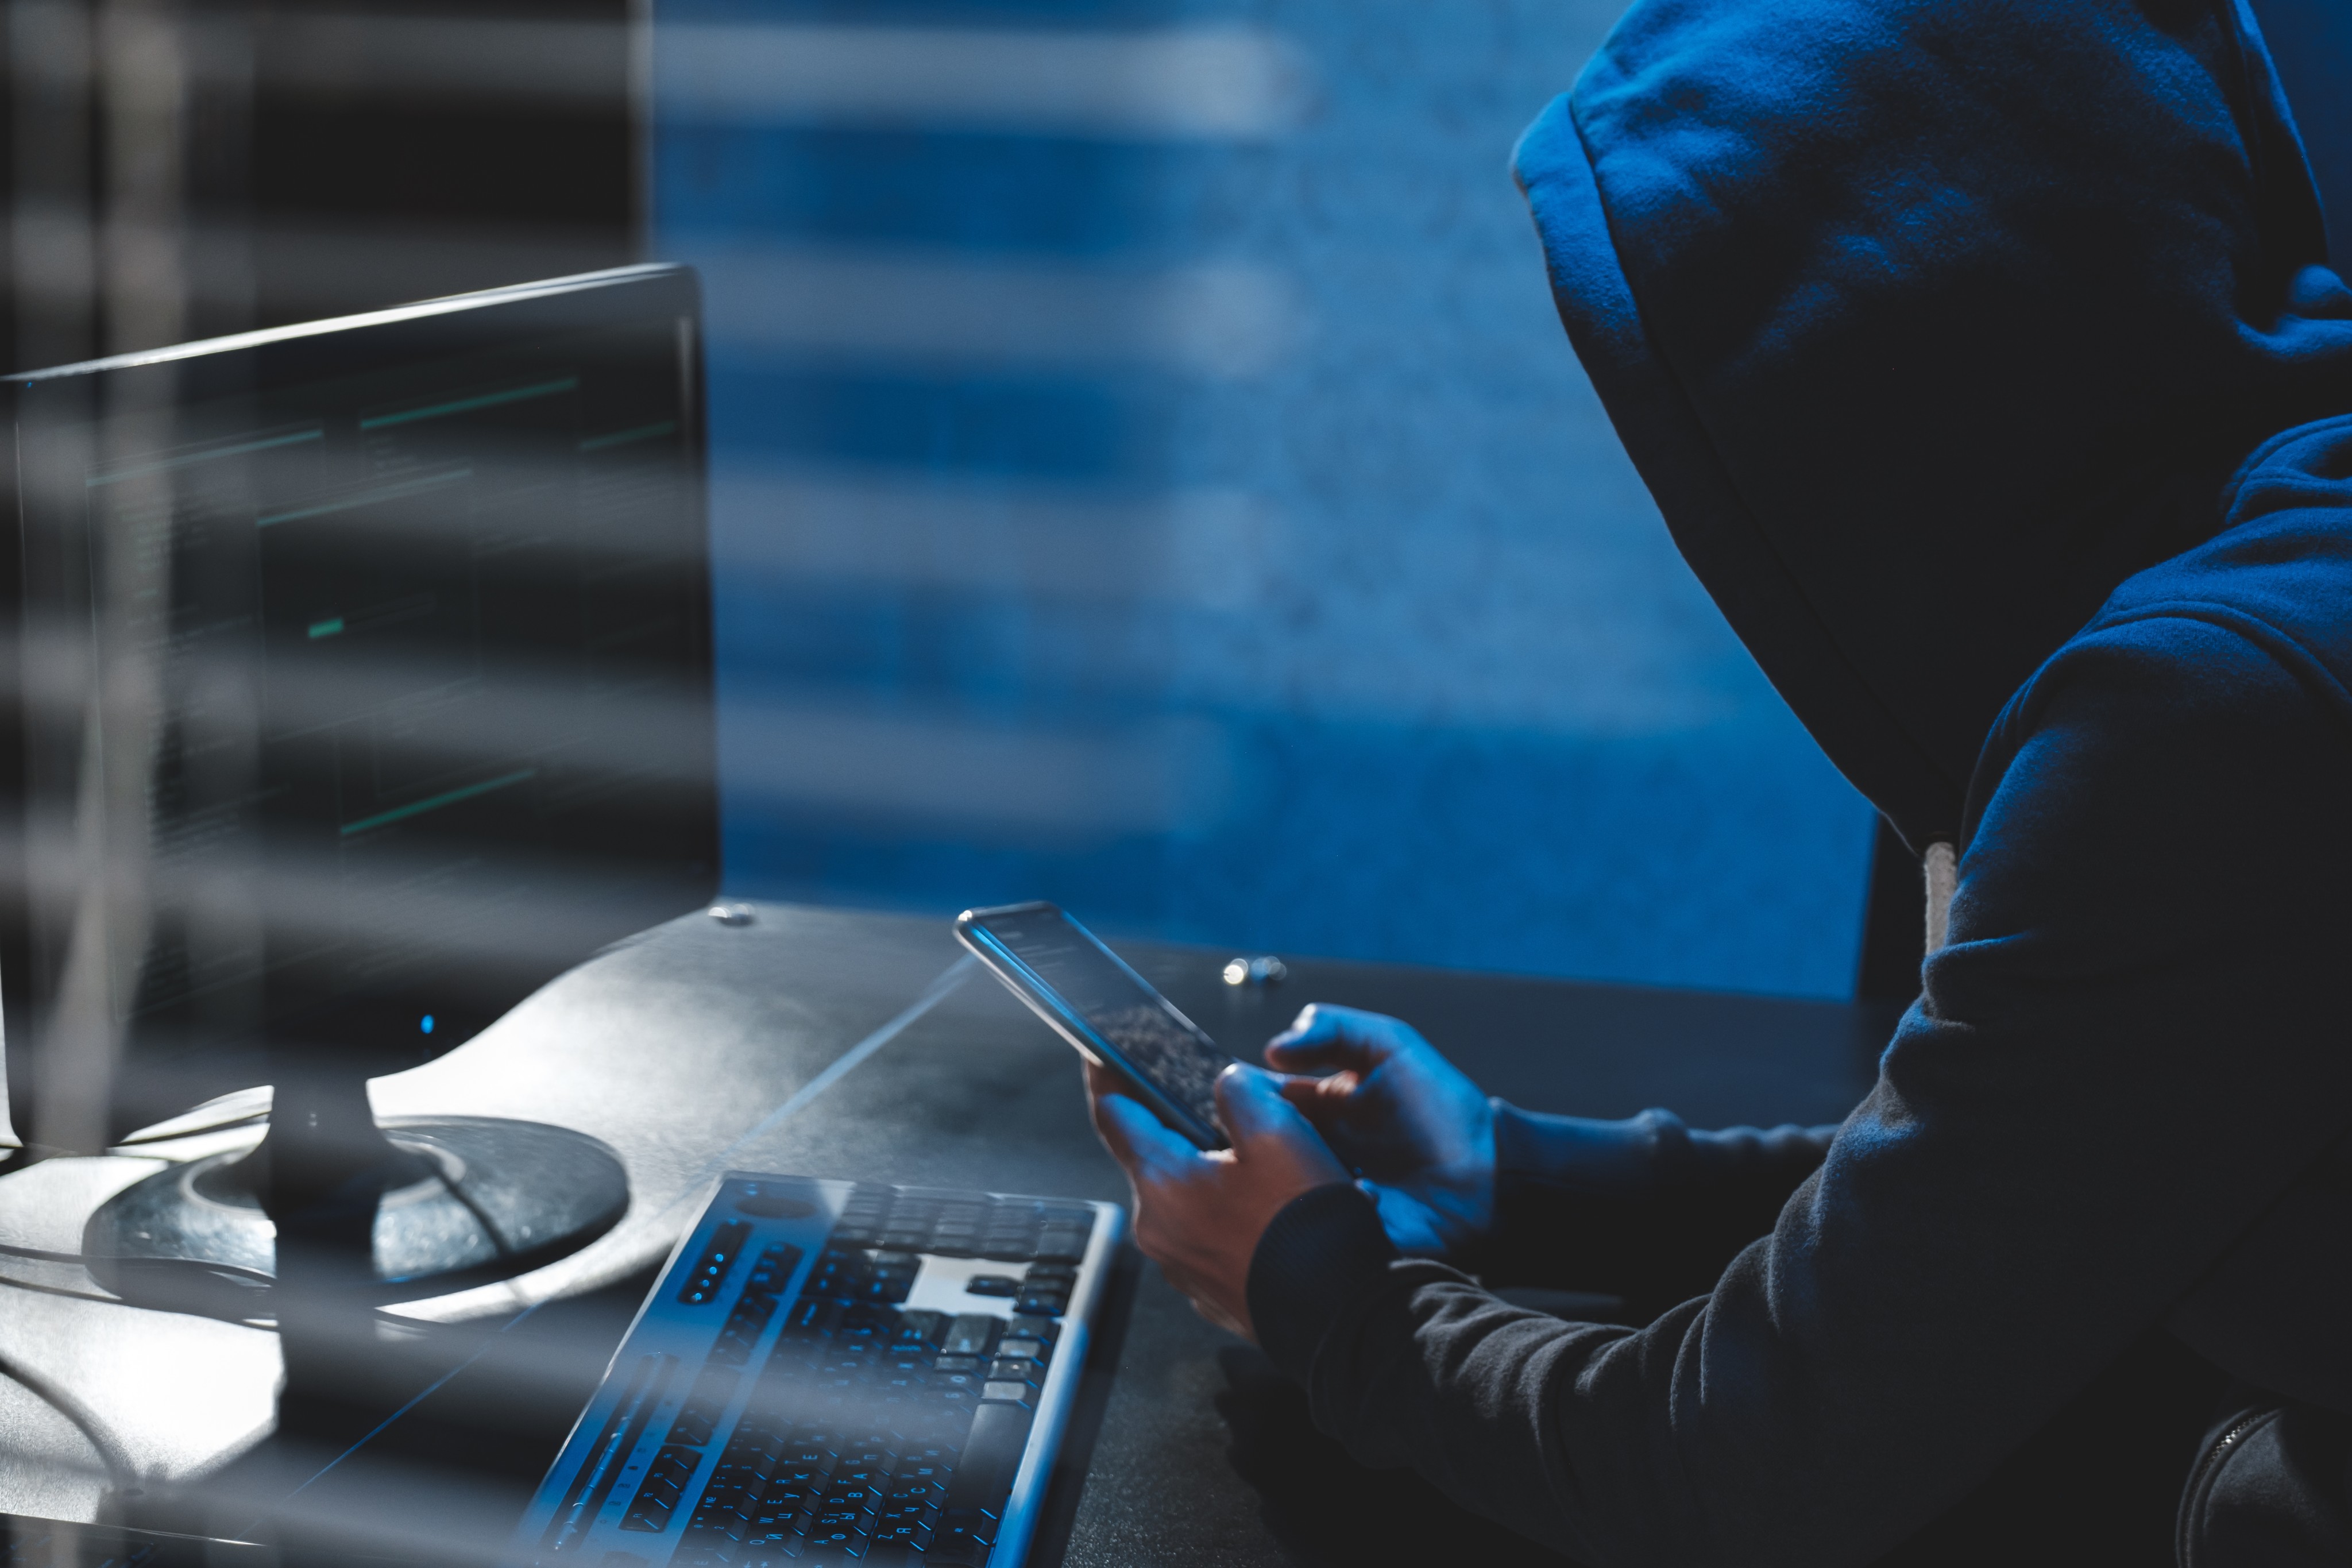 Scammers also coaxed victims into depositing money into a sham trading platform promising a monthly return of 7 per cent interest, police say. Photo: Shutterstock